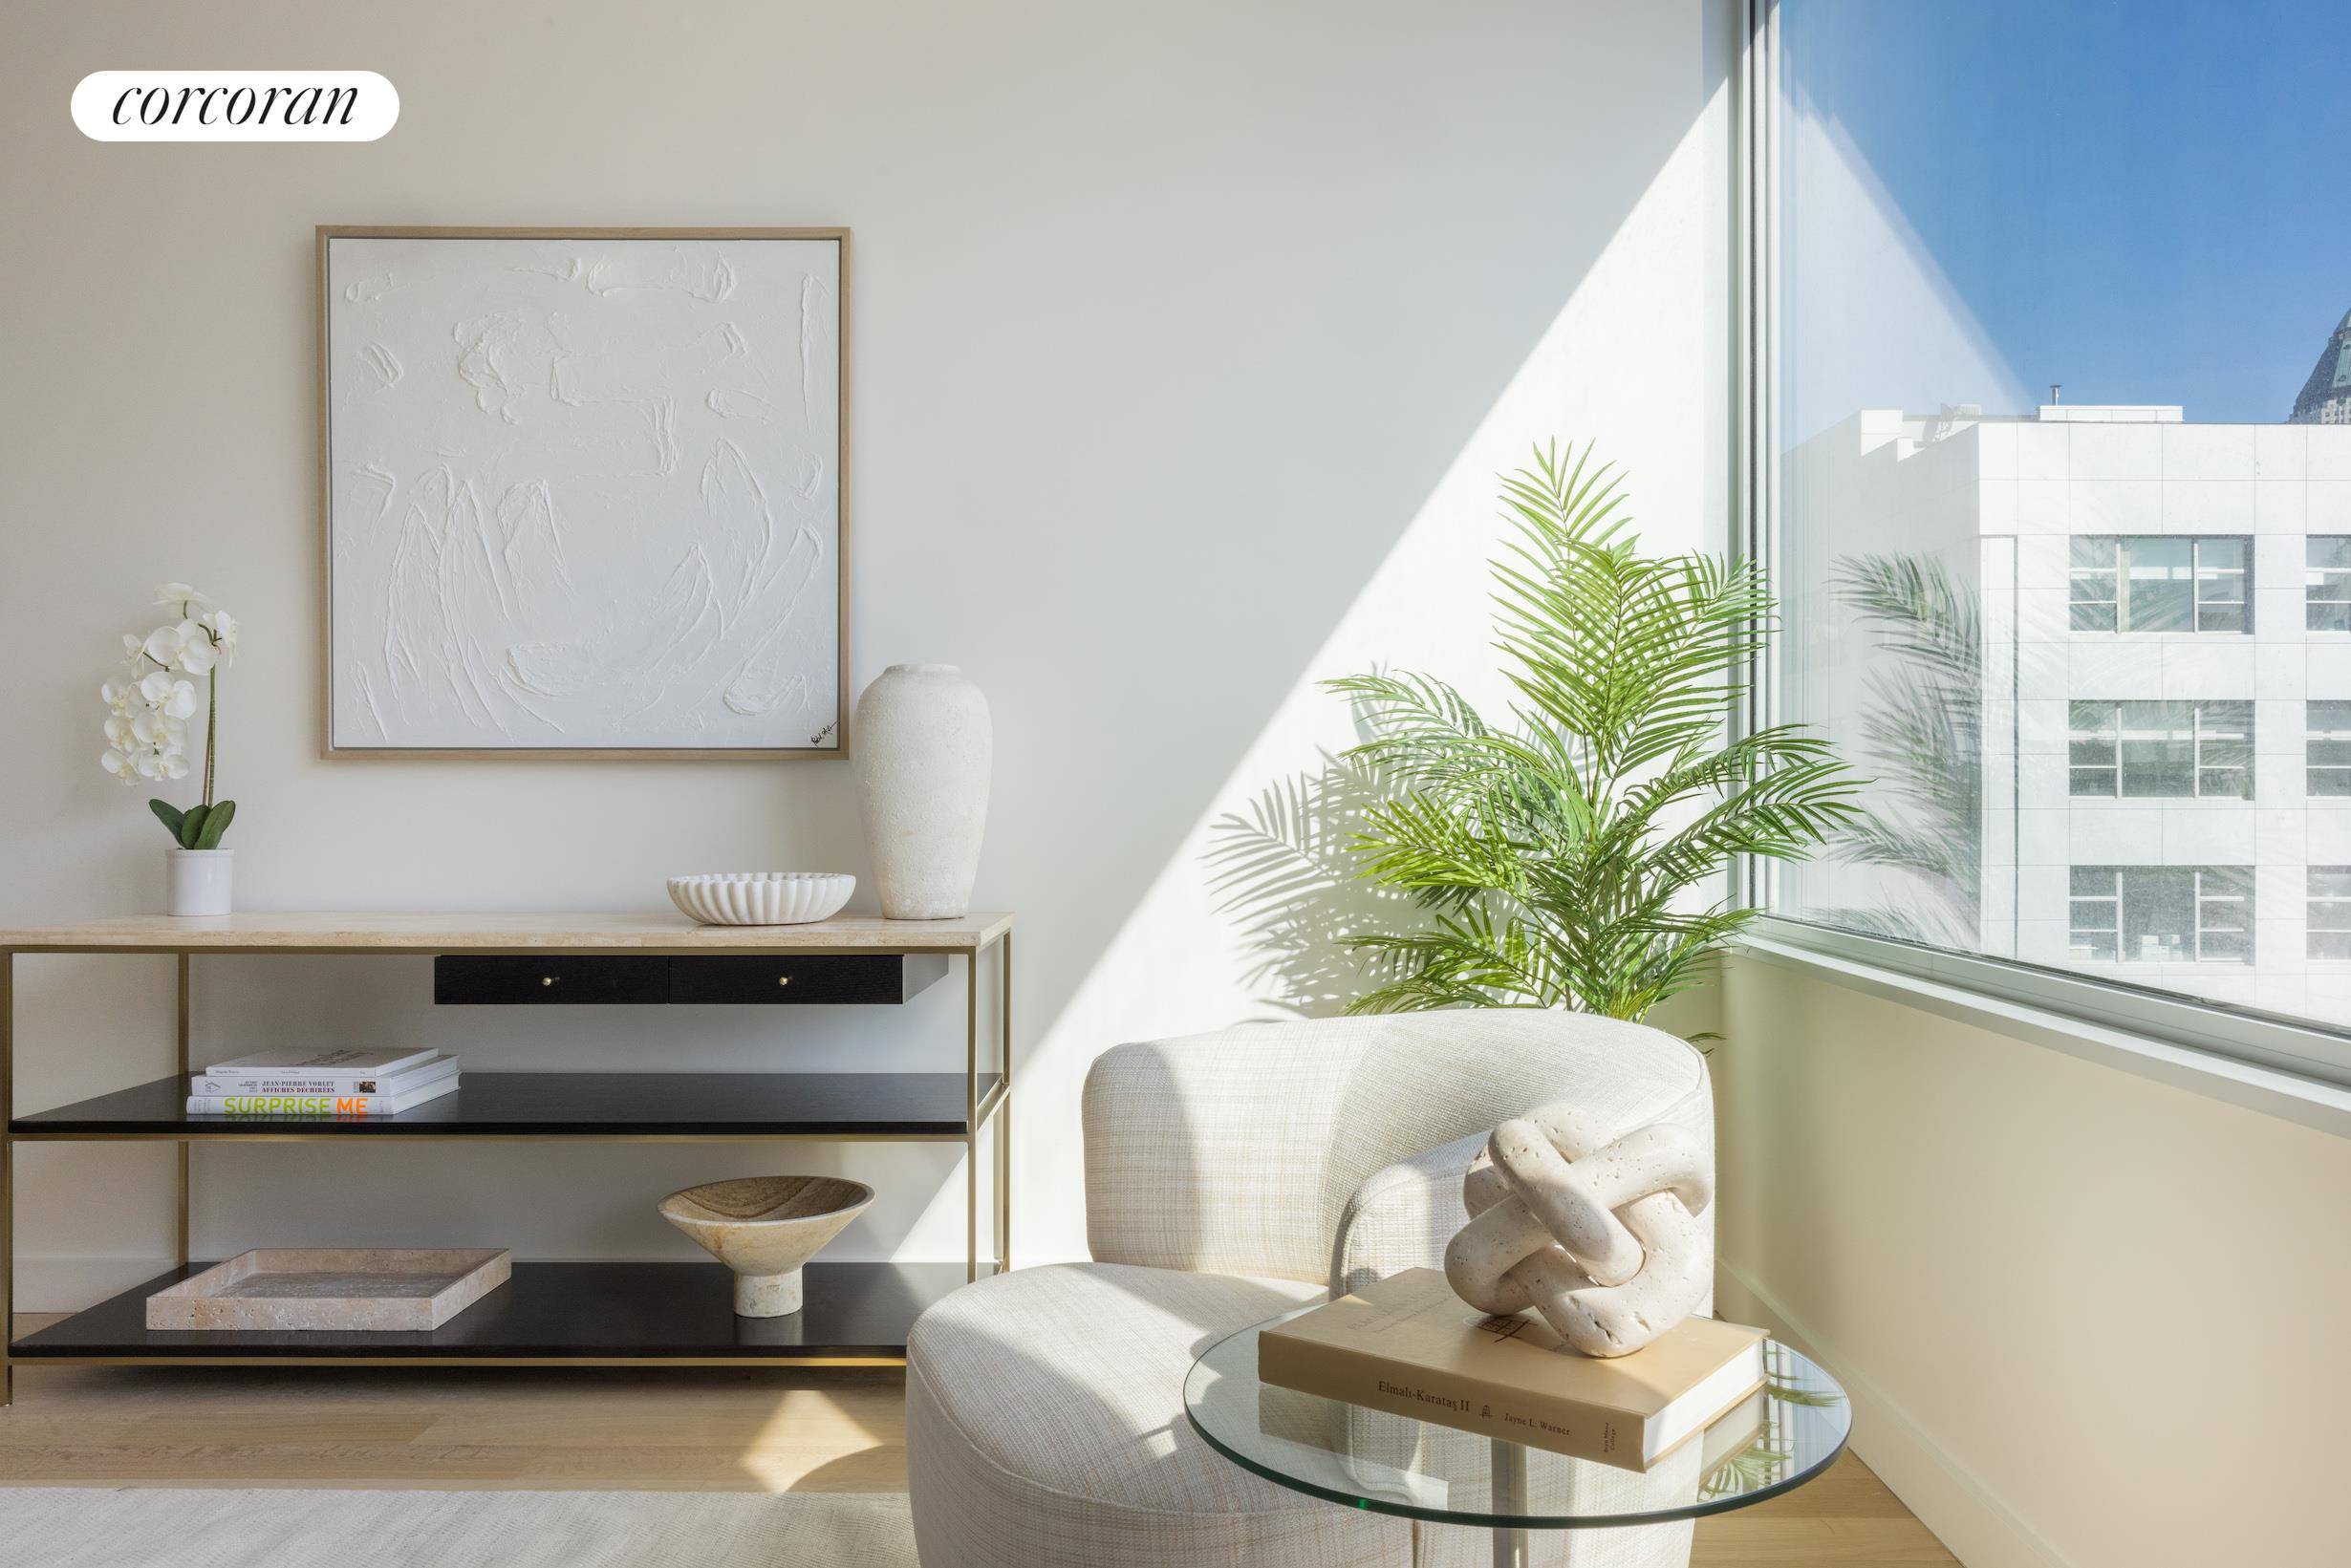 Immediate Occupancy. Designed by renowned architect Alvaro Siza with interiors by Gabellini Sheppard, residence 5A is a 869 SF south east facing one bedroom with elegantly appointed modern finishes.